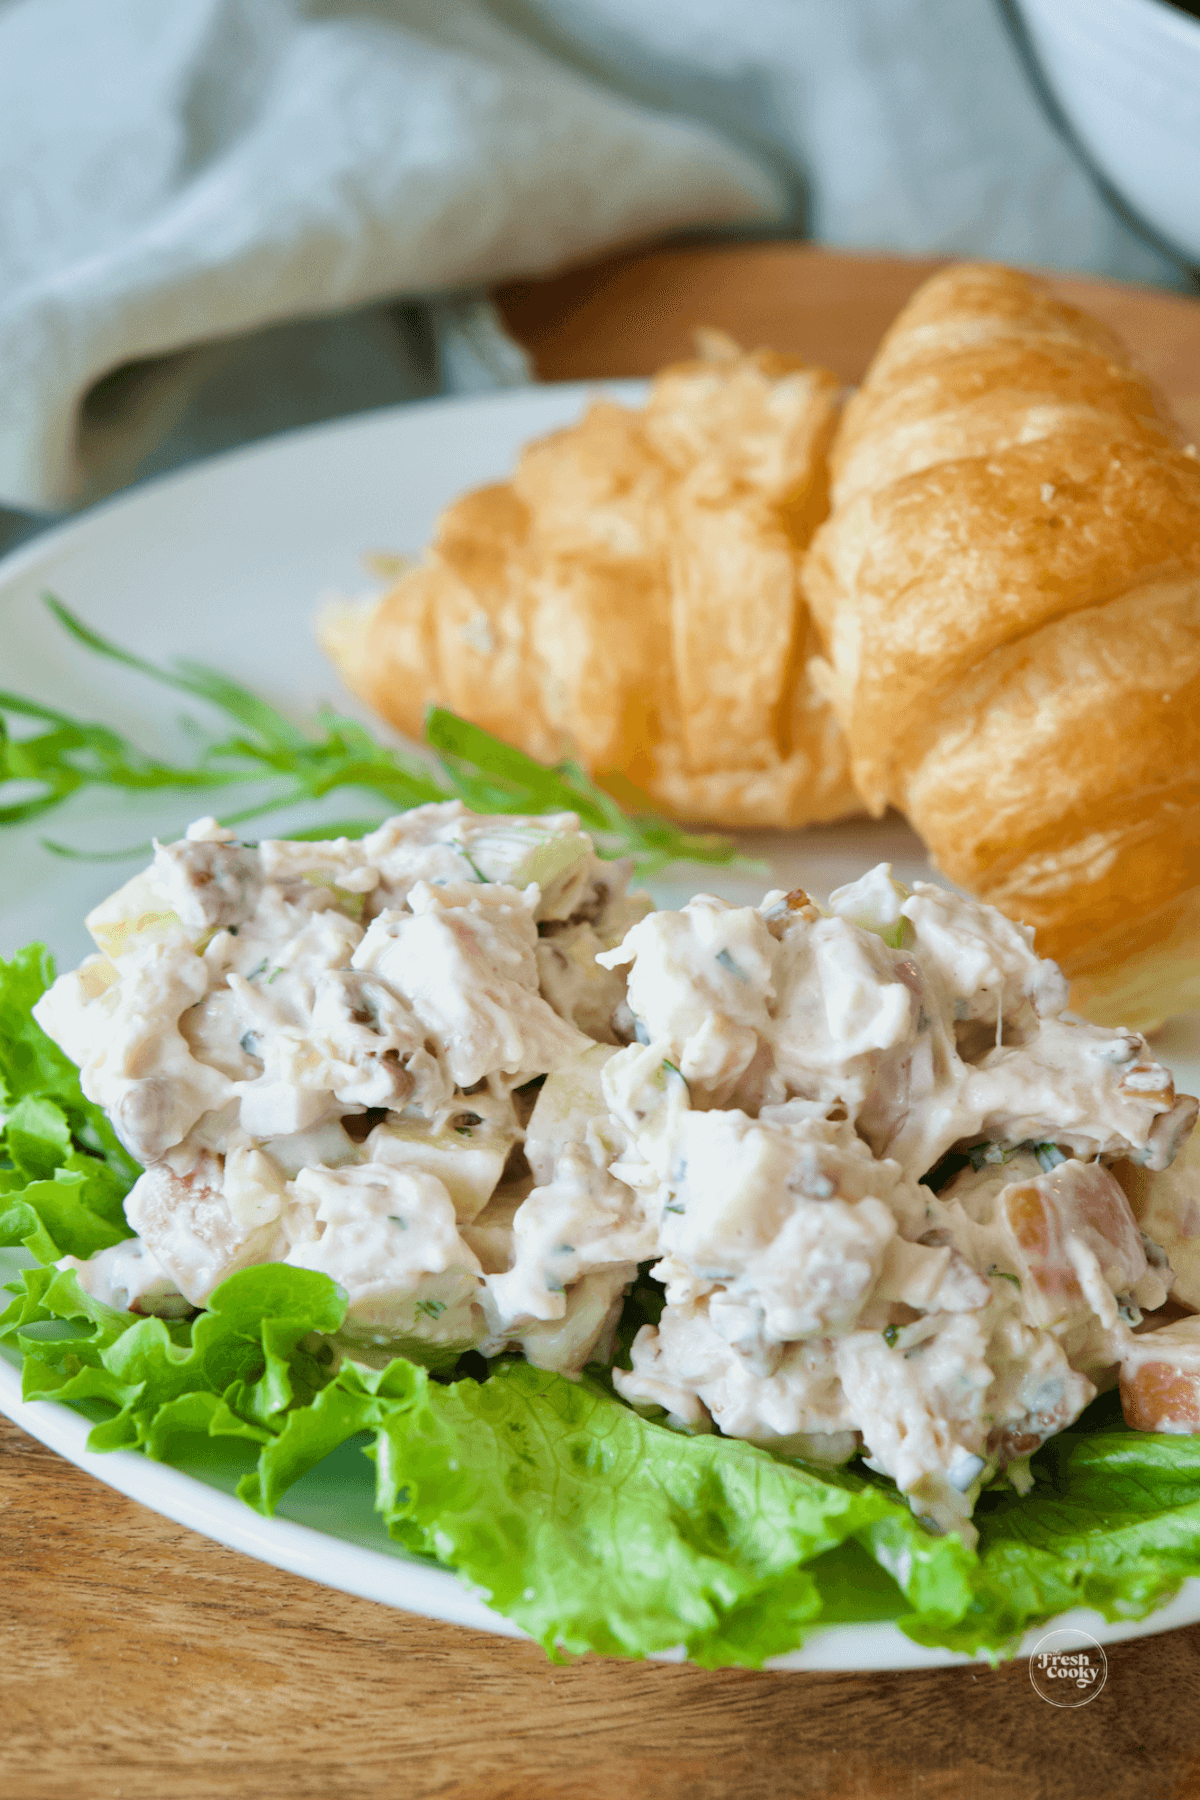 Serve chicken salad on bed of lettuce with crackers or croissants. 